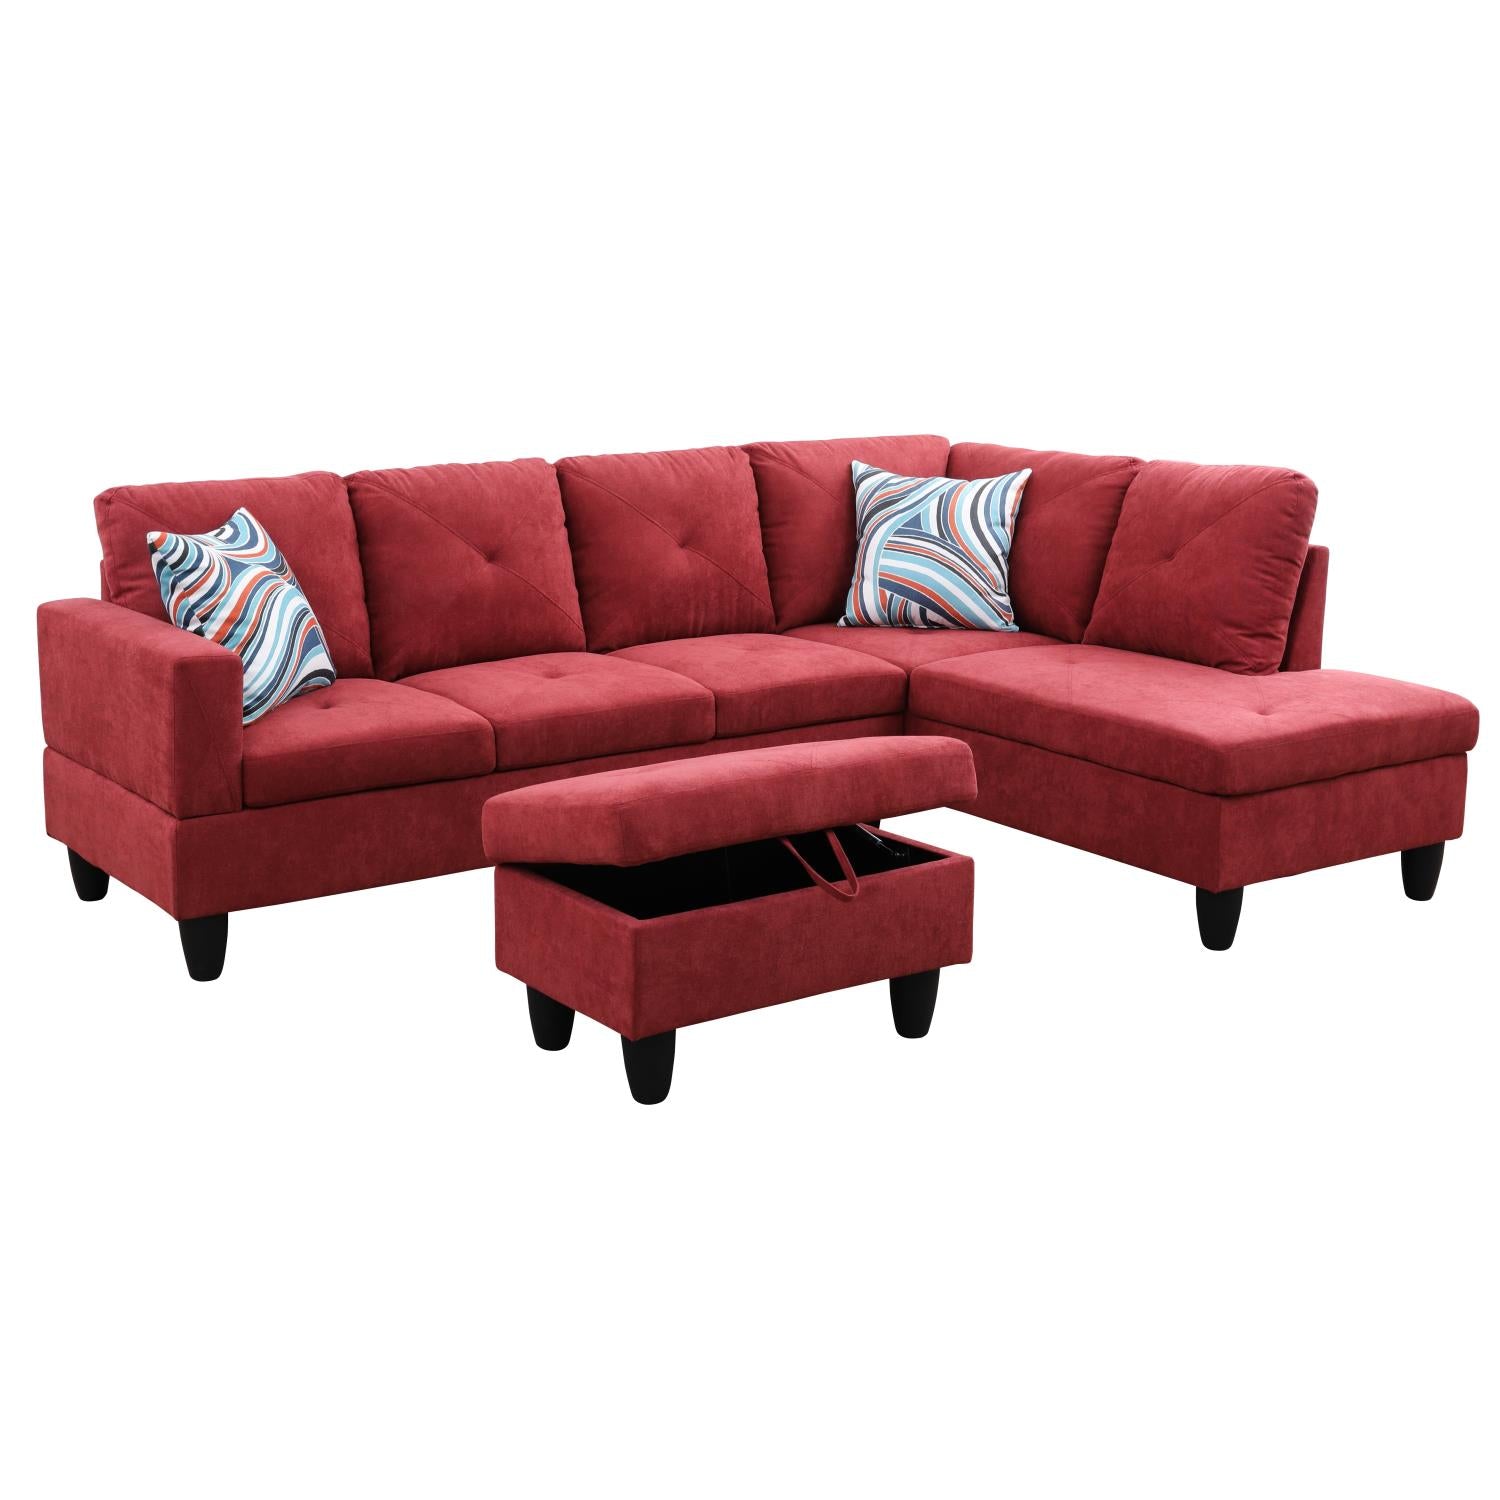 Ainehome Red L-Shaped Flannel Combo Sofa Set